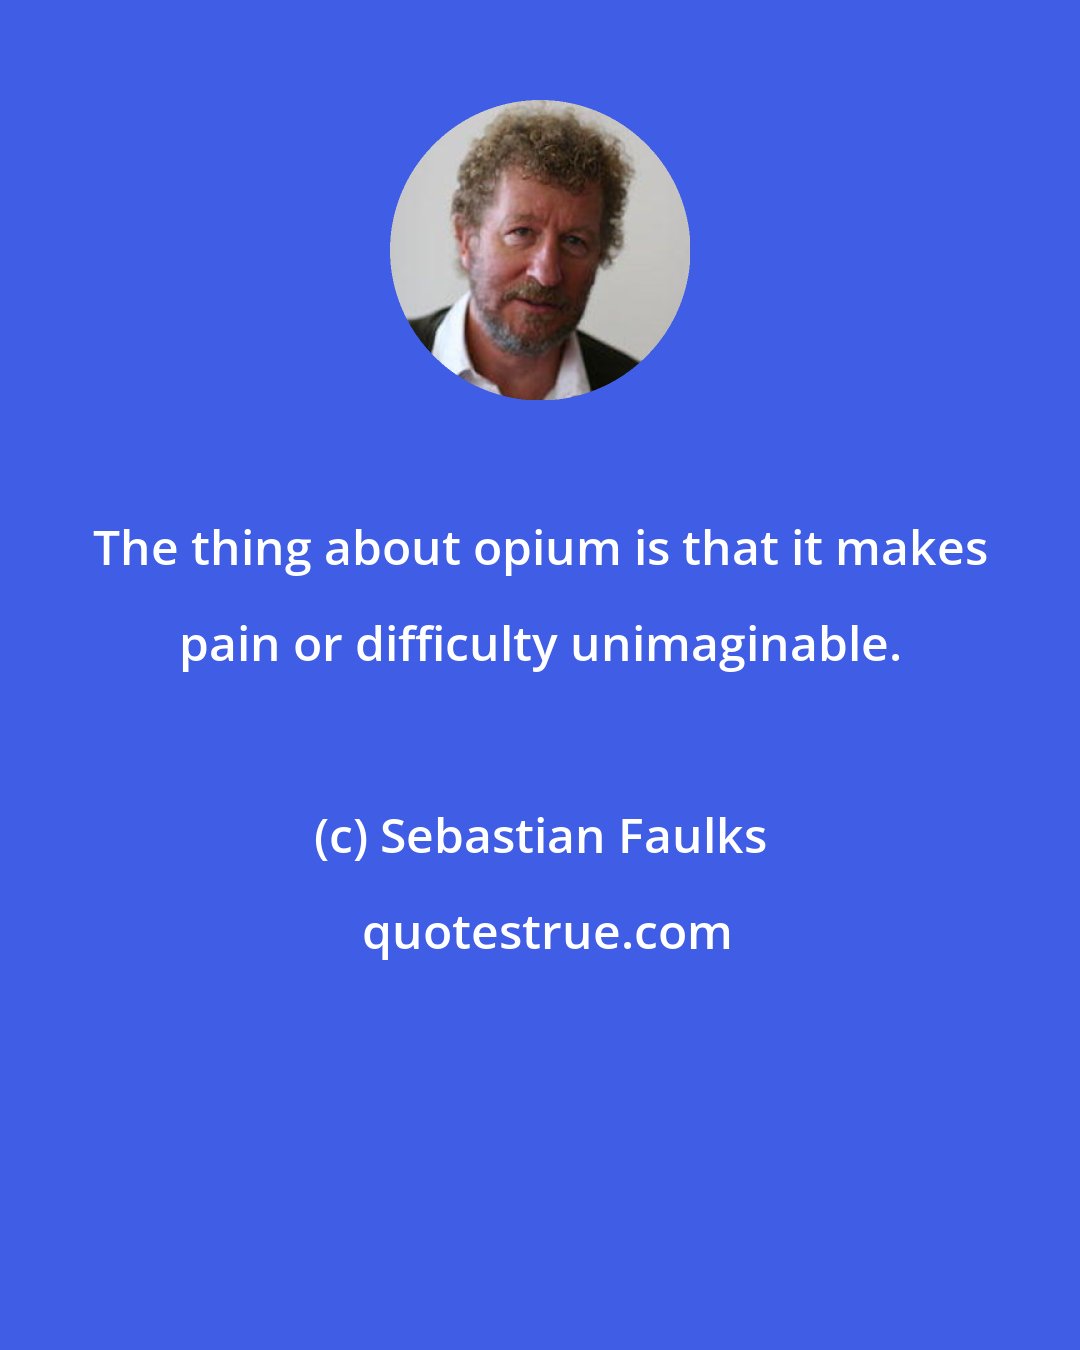 Sebastian Faulks: The thing about opium is that it makes pain or difficulty unimaginable.